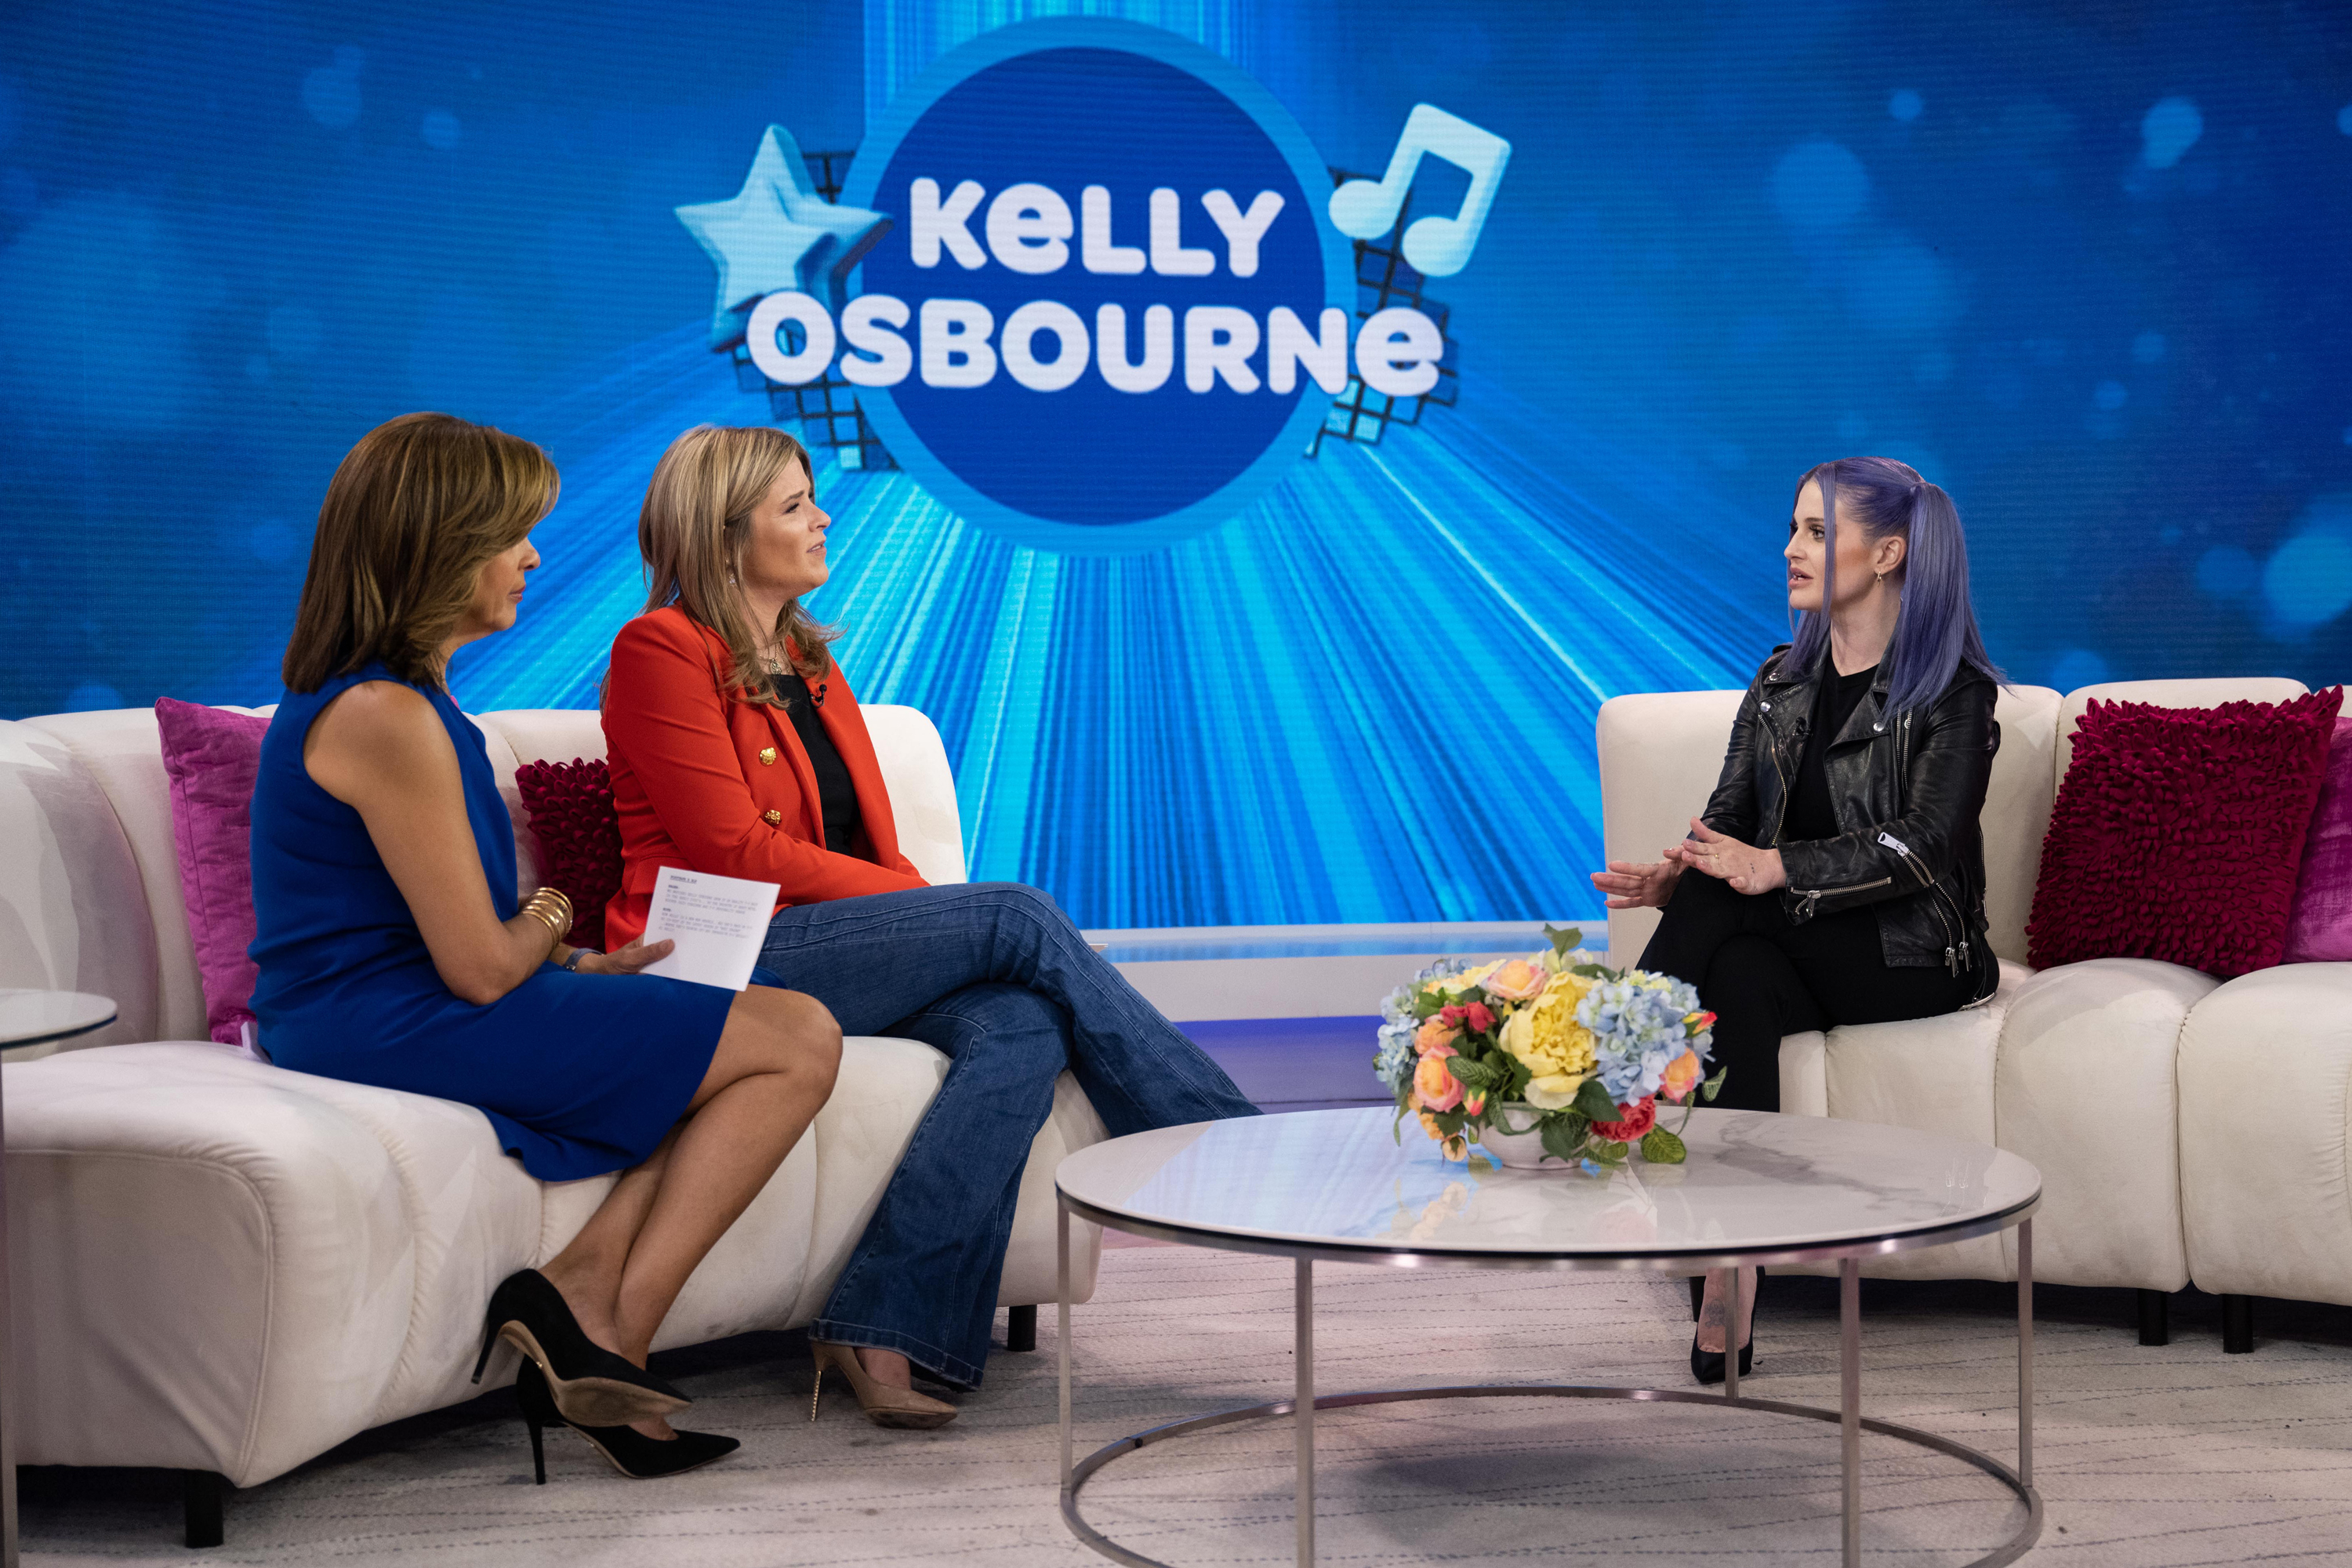 Kelly Osbourne chats with Hoda Kotb and Jenna Bush Hager on Today show, seated on a couch, all in front of a show-themed backdrop